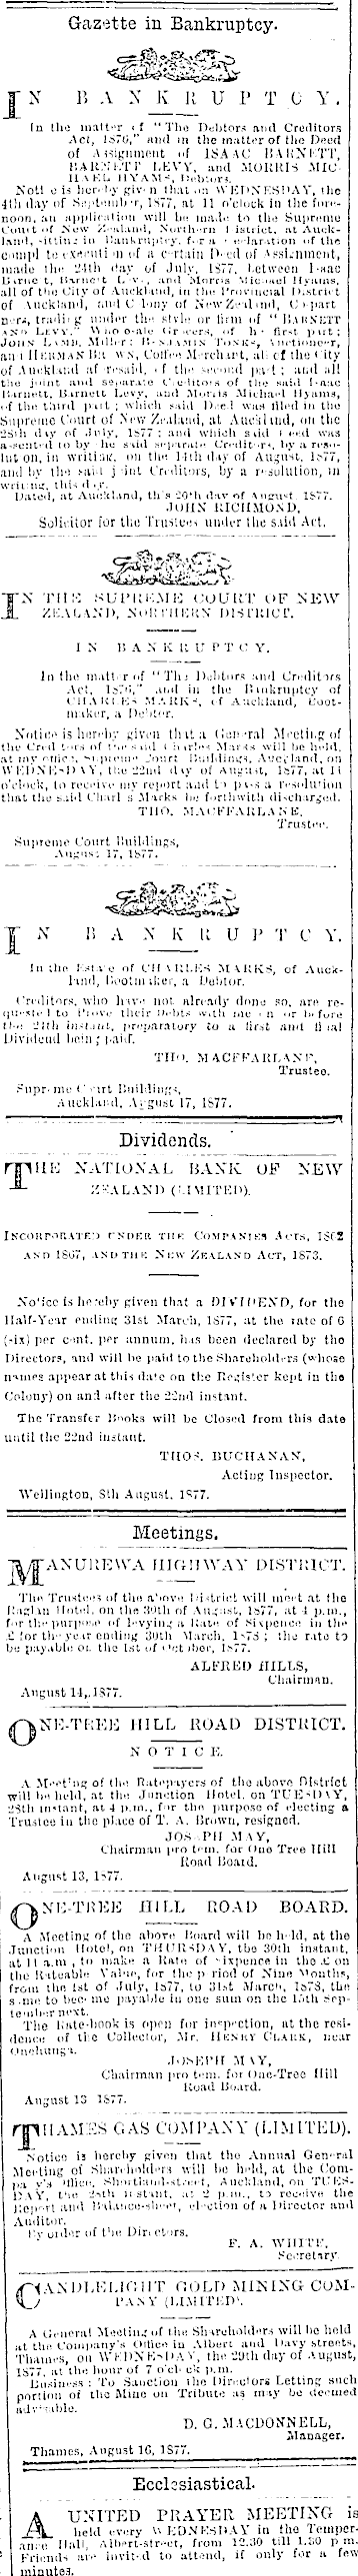 Papers Past Newspapers New Zealand Herald 21 August 1877 Page 3 Advertisements Column 1